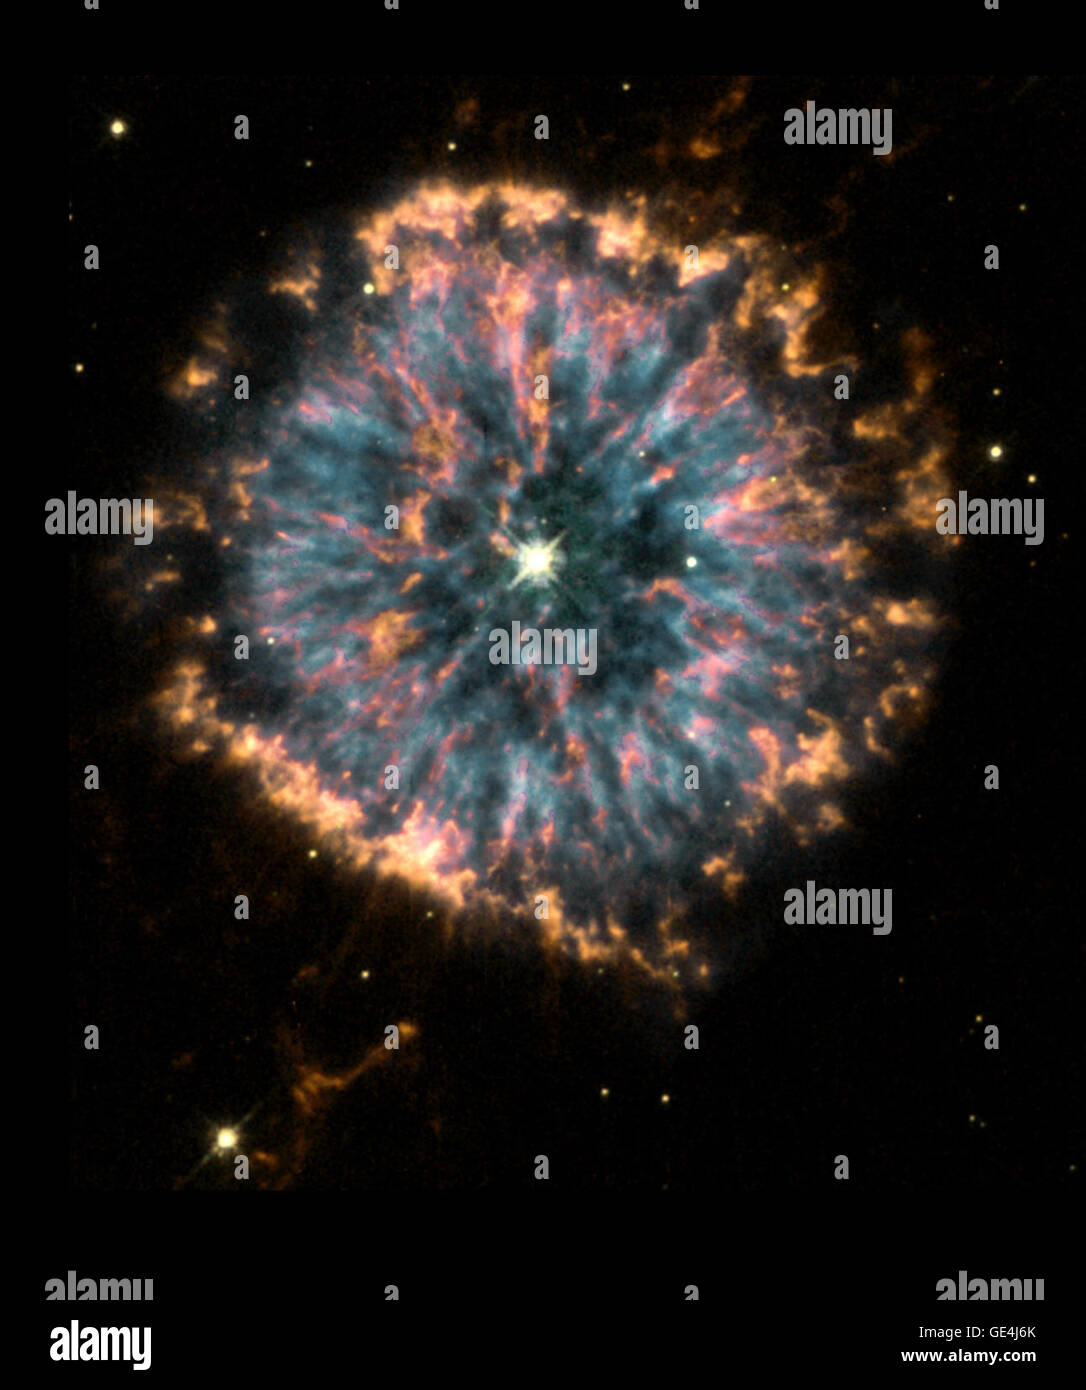 Astronomers using NASA's Hubble Space Telescope obtained images of the strikingly unusual planetary nebula, NGC 6751. Glowing in the constellation Aquila like a giant eye, the nebula is a cloud of gas ejected several thousand years ago from the hot star visible in its center. The Hubble observations were obtained in 1998 with the Wide Field and Planetary Camera 2 (WFPC2) by a team of astronomers led by Arsen Hajian of the U.S. Naval Observatory in Washington, DC. The Hubble Heritage team, working at the Space Telescope Science Institute in Baltimore, prepared this color rendition by combining  Stock Photo